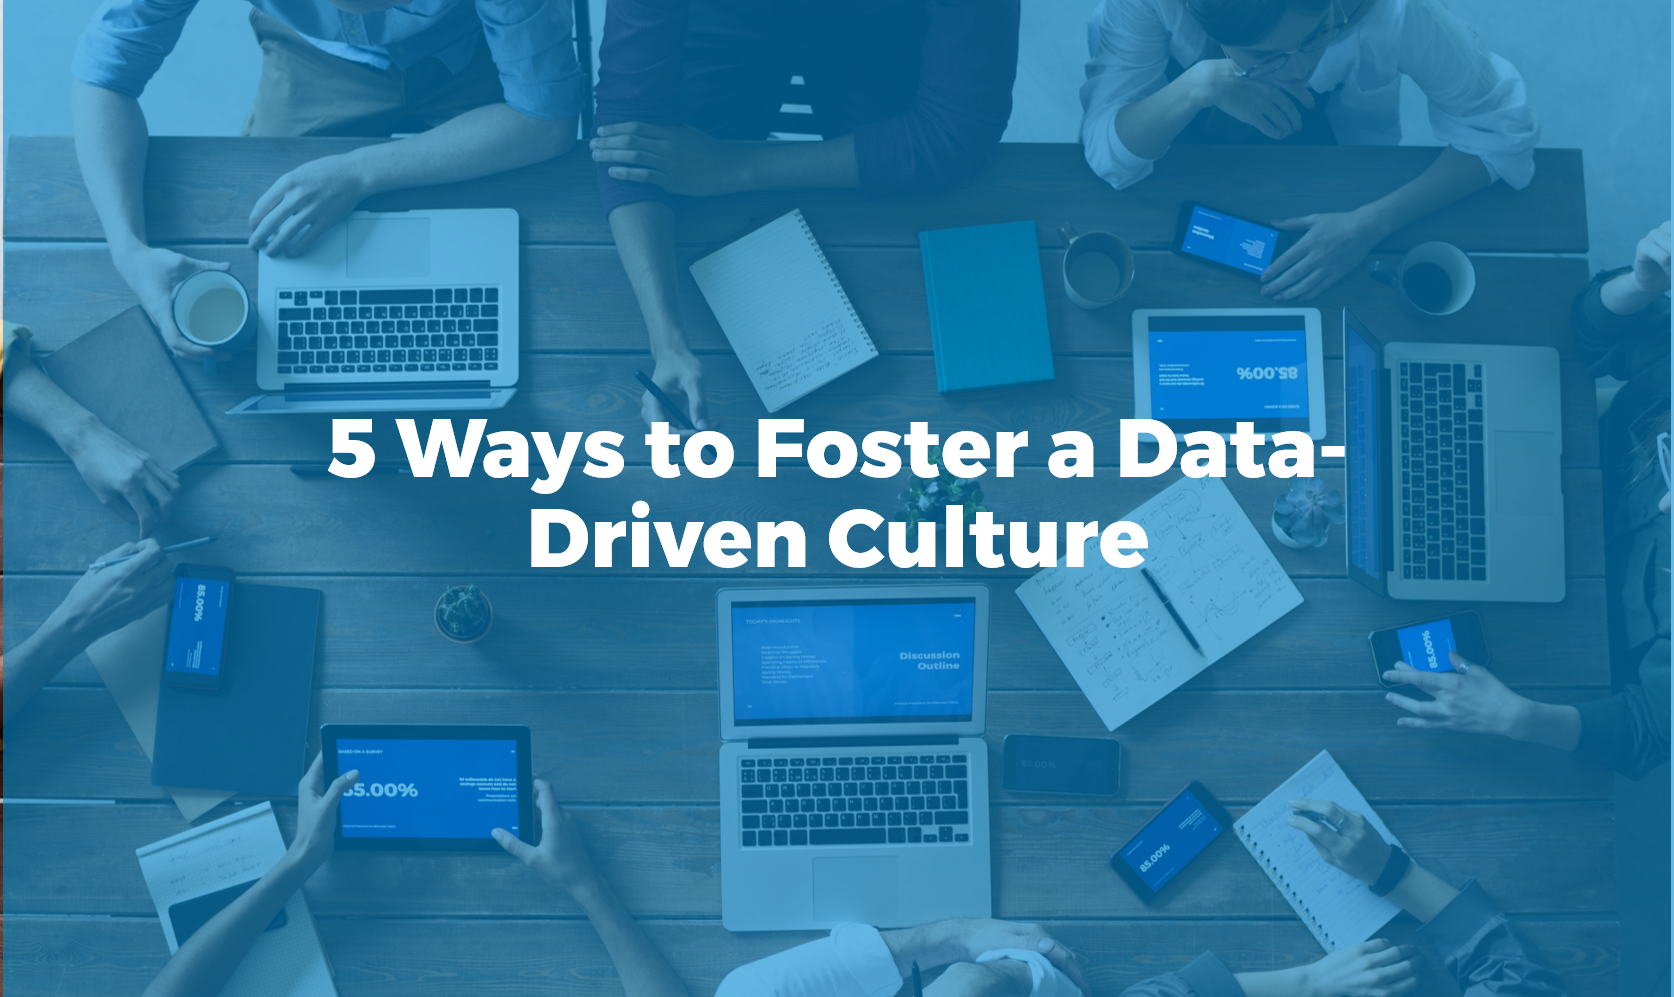 5 Ways to Foster a Data-Driven Culture in the Enterprise